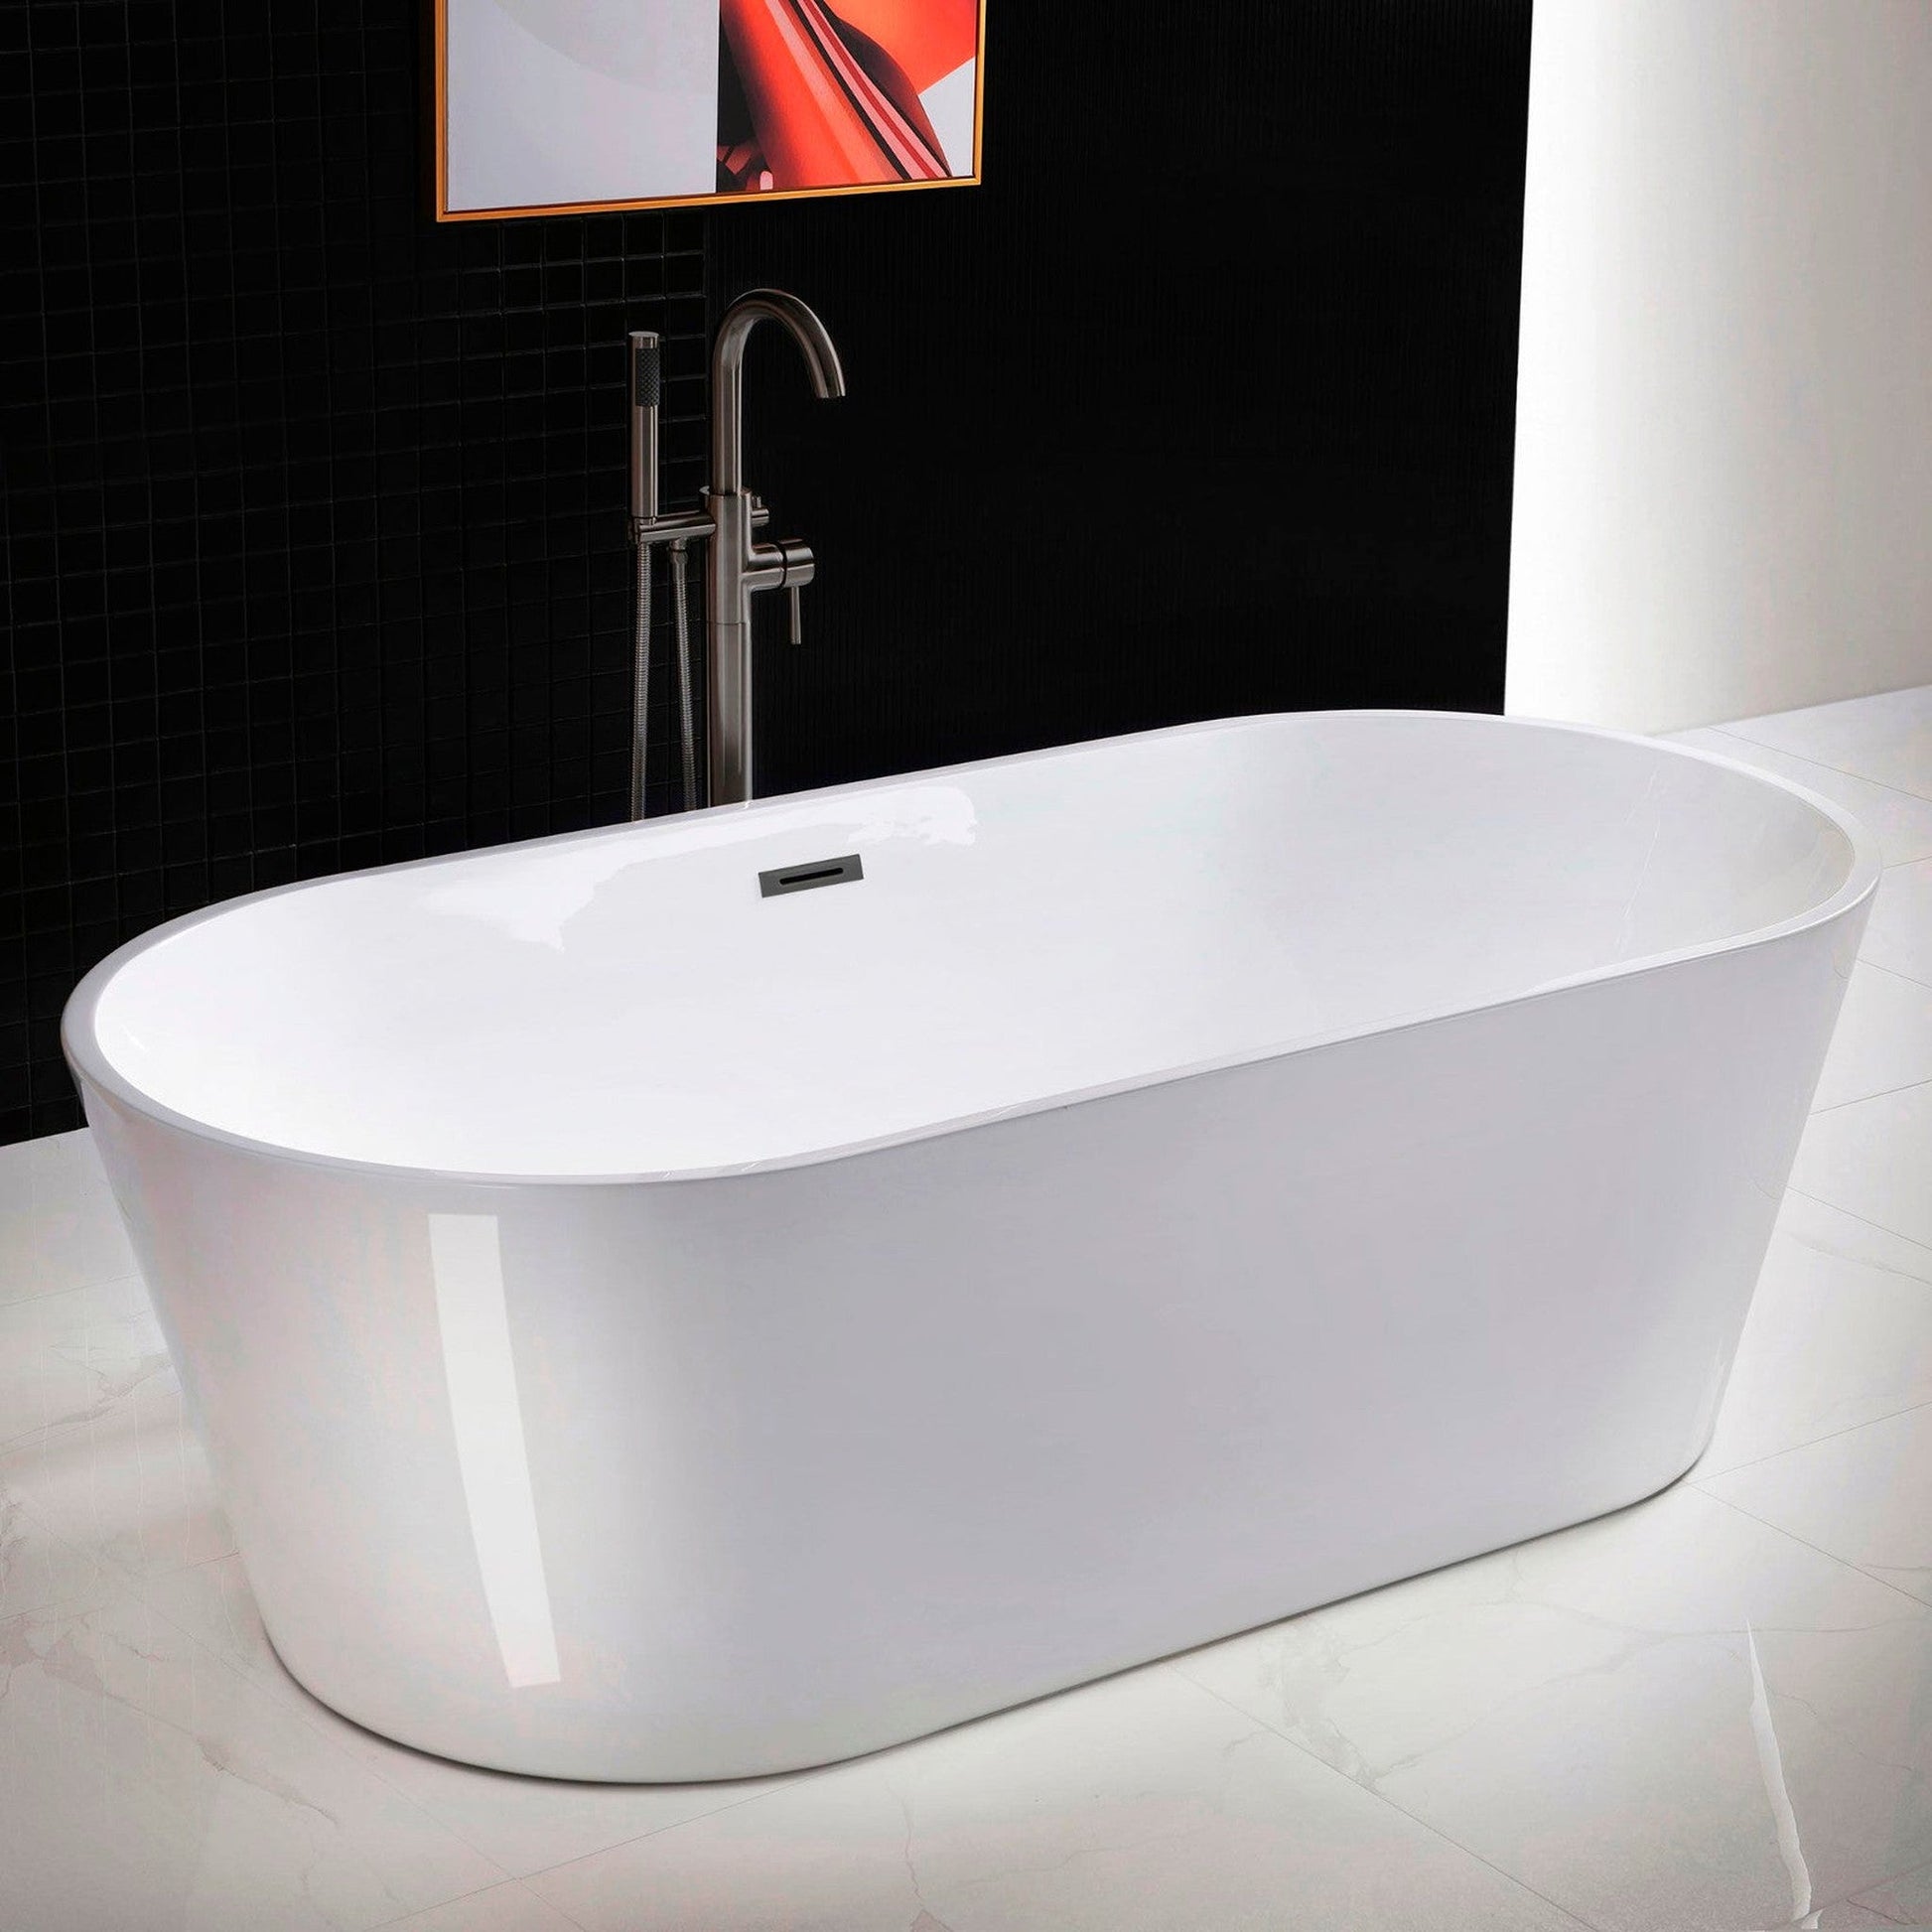 WoodBridge 71" White Acrylic Freestanding Contemporary Soaking Bathtub With Matte Black Drain, Overflow, F0025MBVT Tub Filler and Caddy Tray